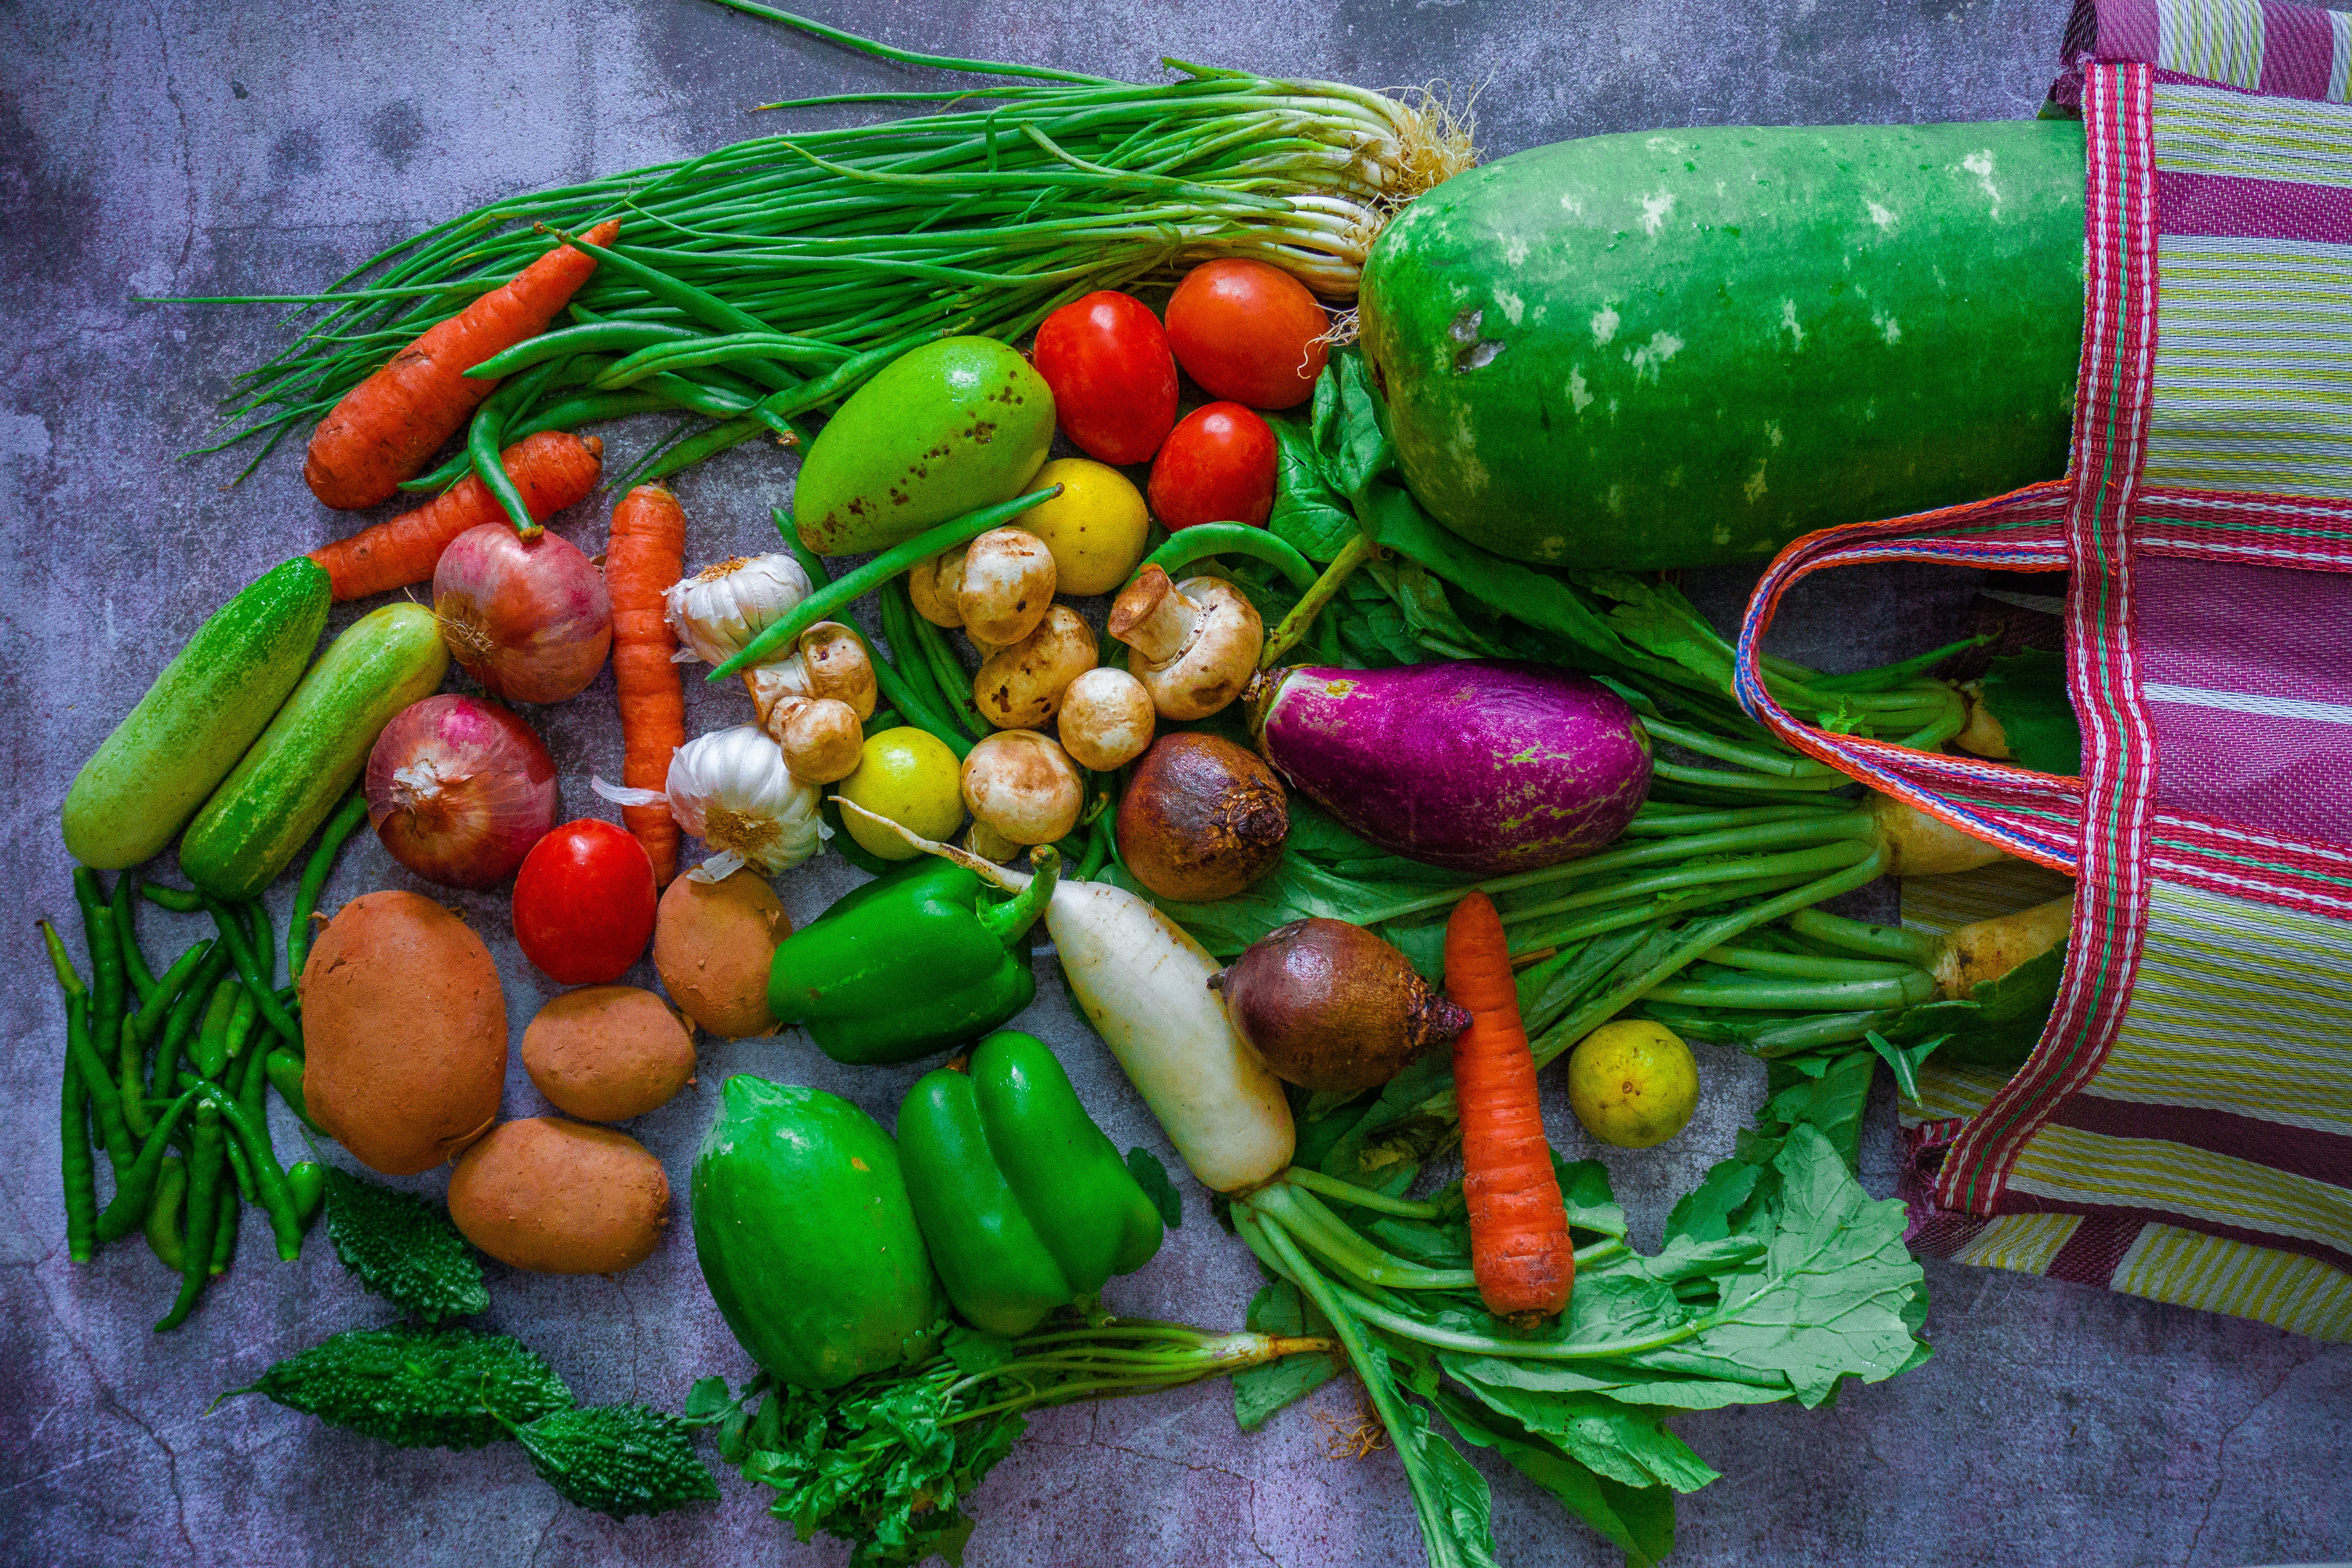 Vegetables emptied from a basket-Food Loss and Awareness 2022